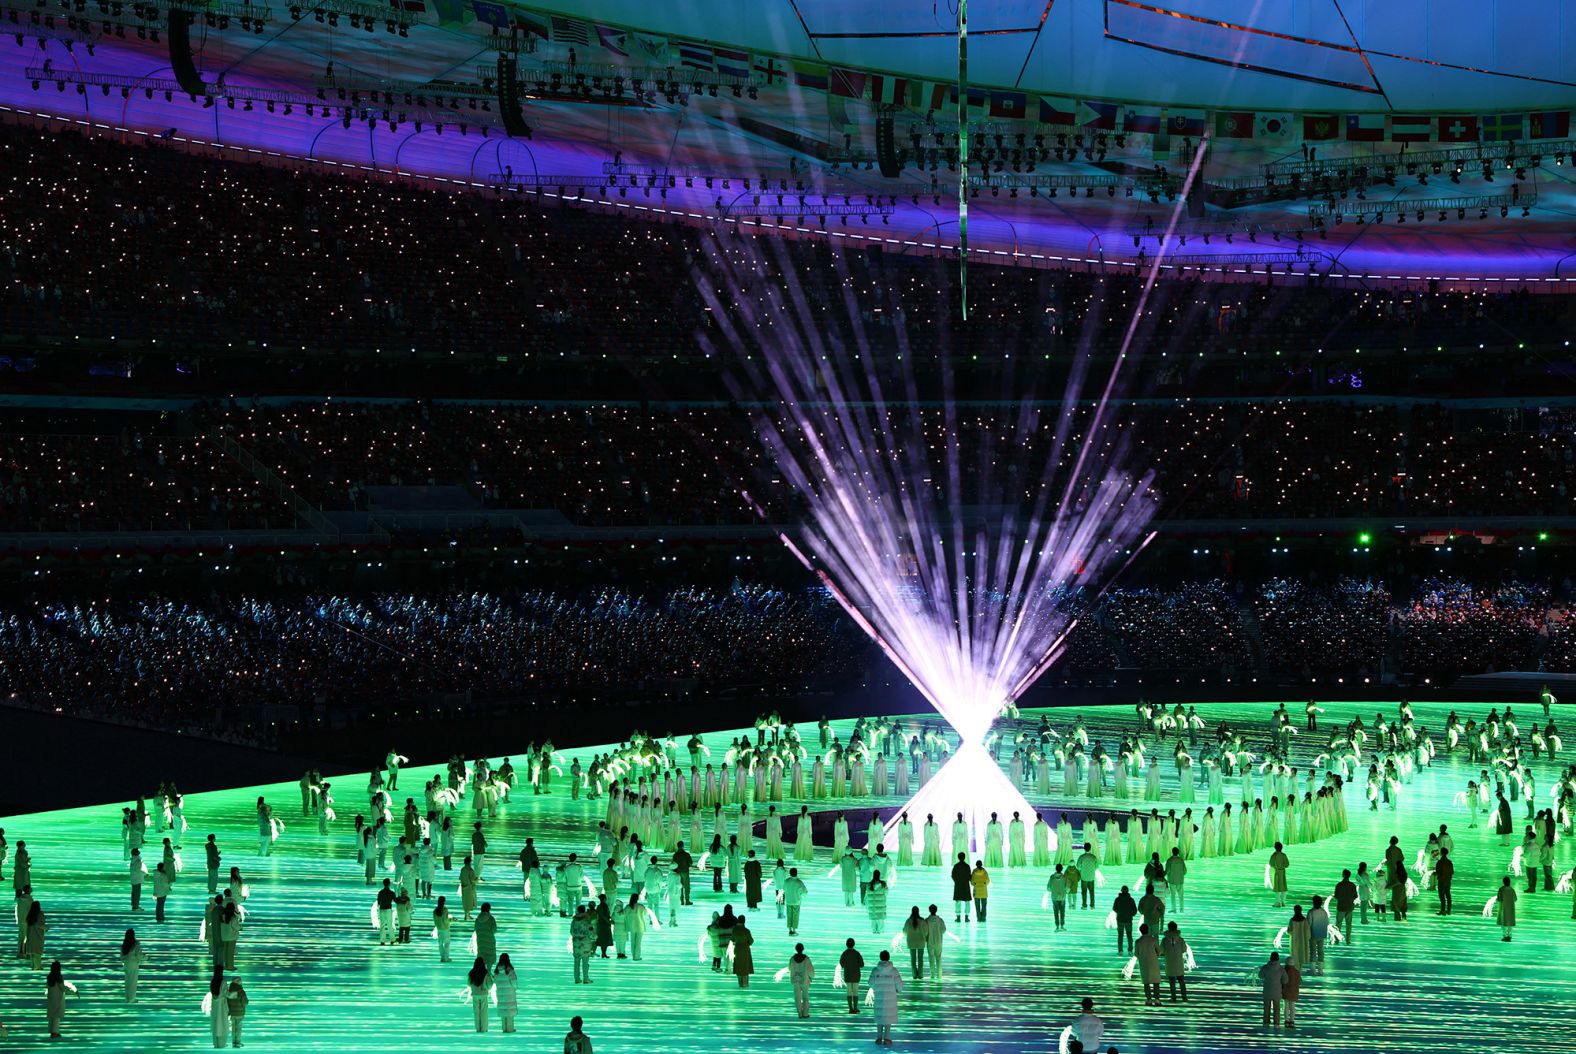 The closing ceremony is less formal than the opening ceremony but still a colorful event.